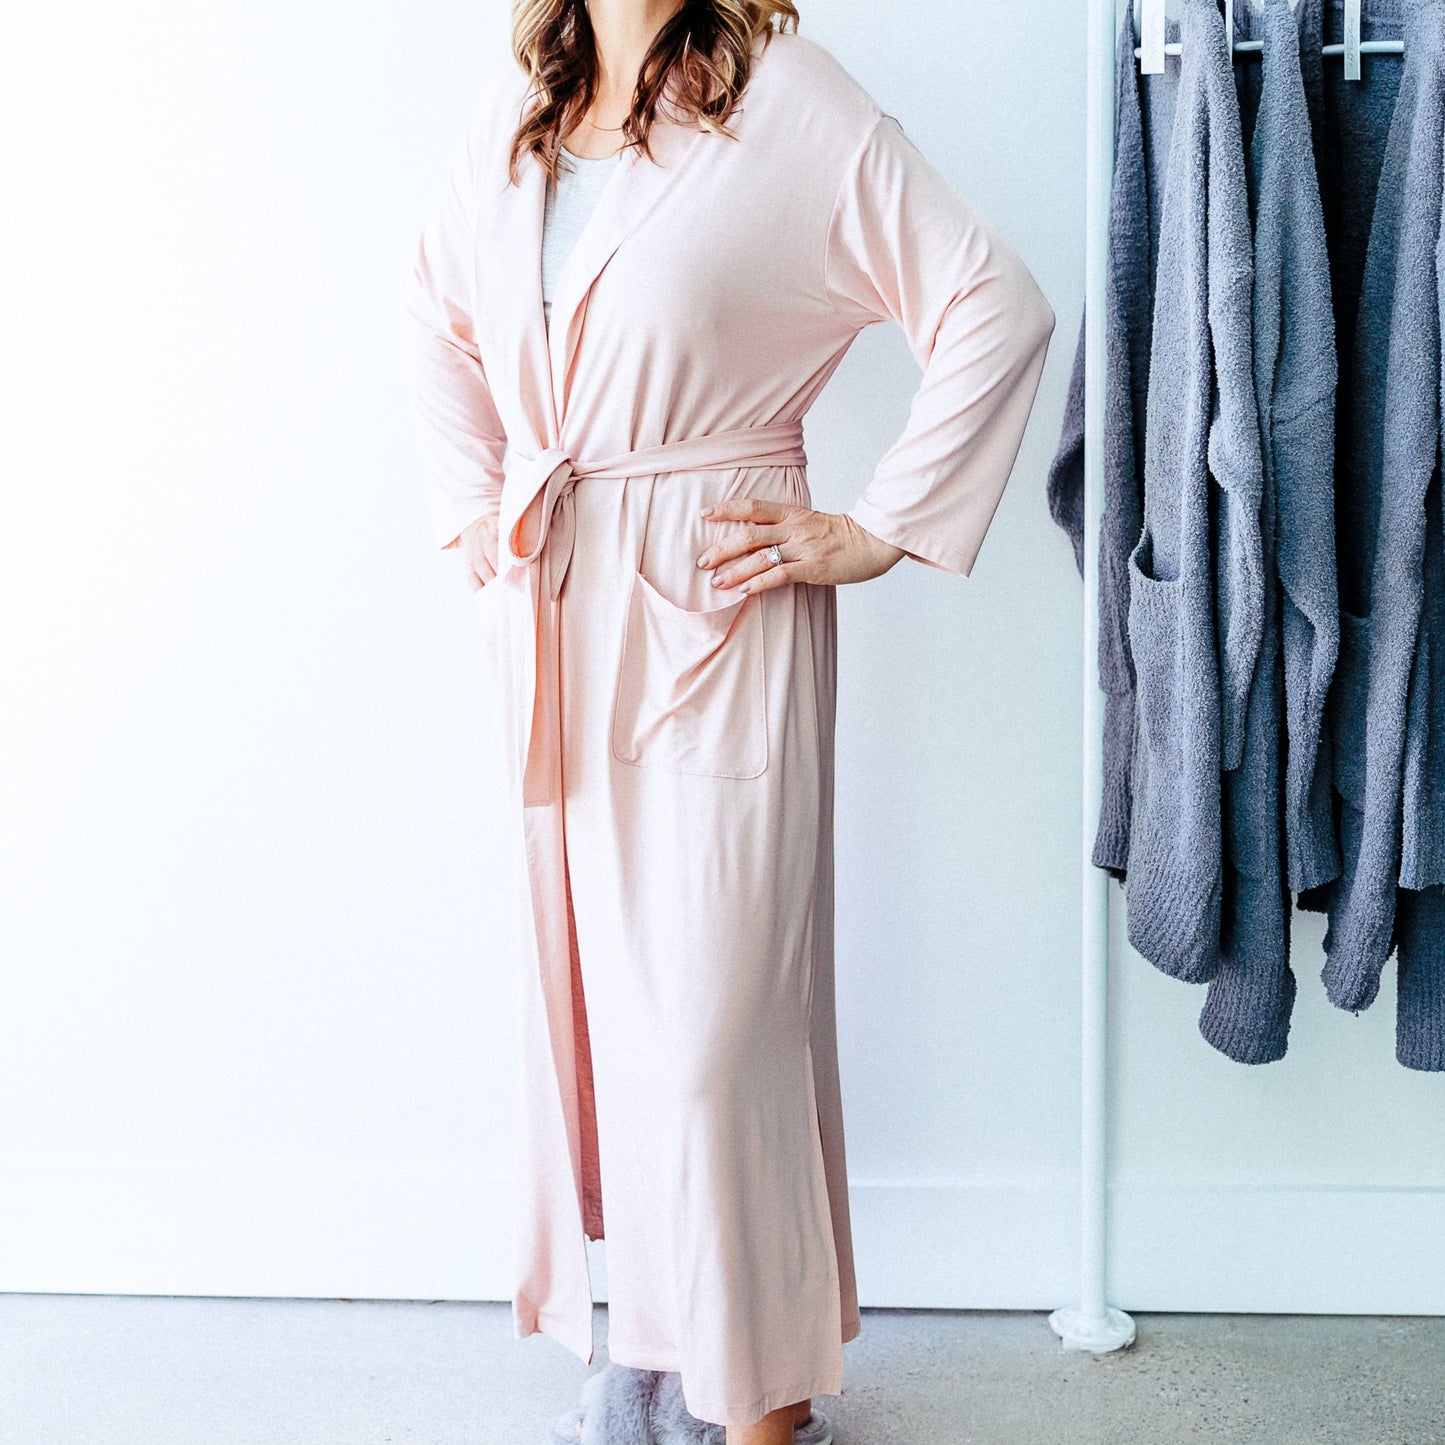 Soft pink breathable bamboo long robe for women comfortable and great gift for mom on mothers day soft silky and easy to care for and wear for ultimate luxury and created by women